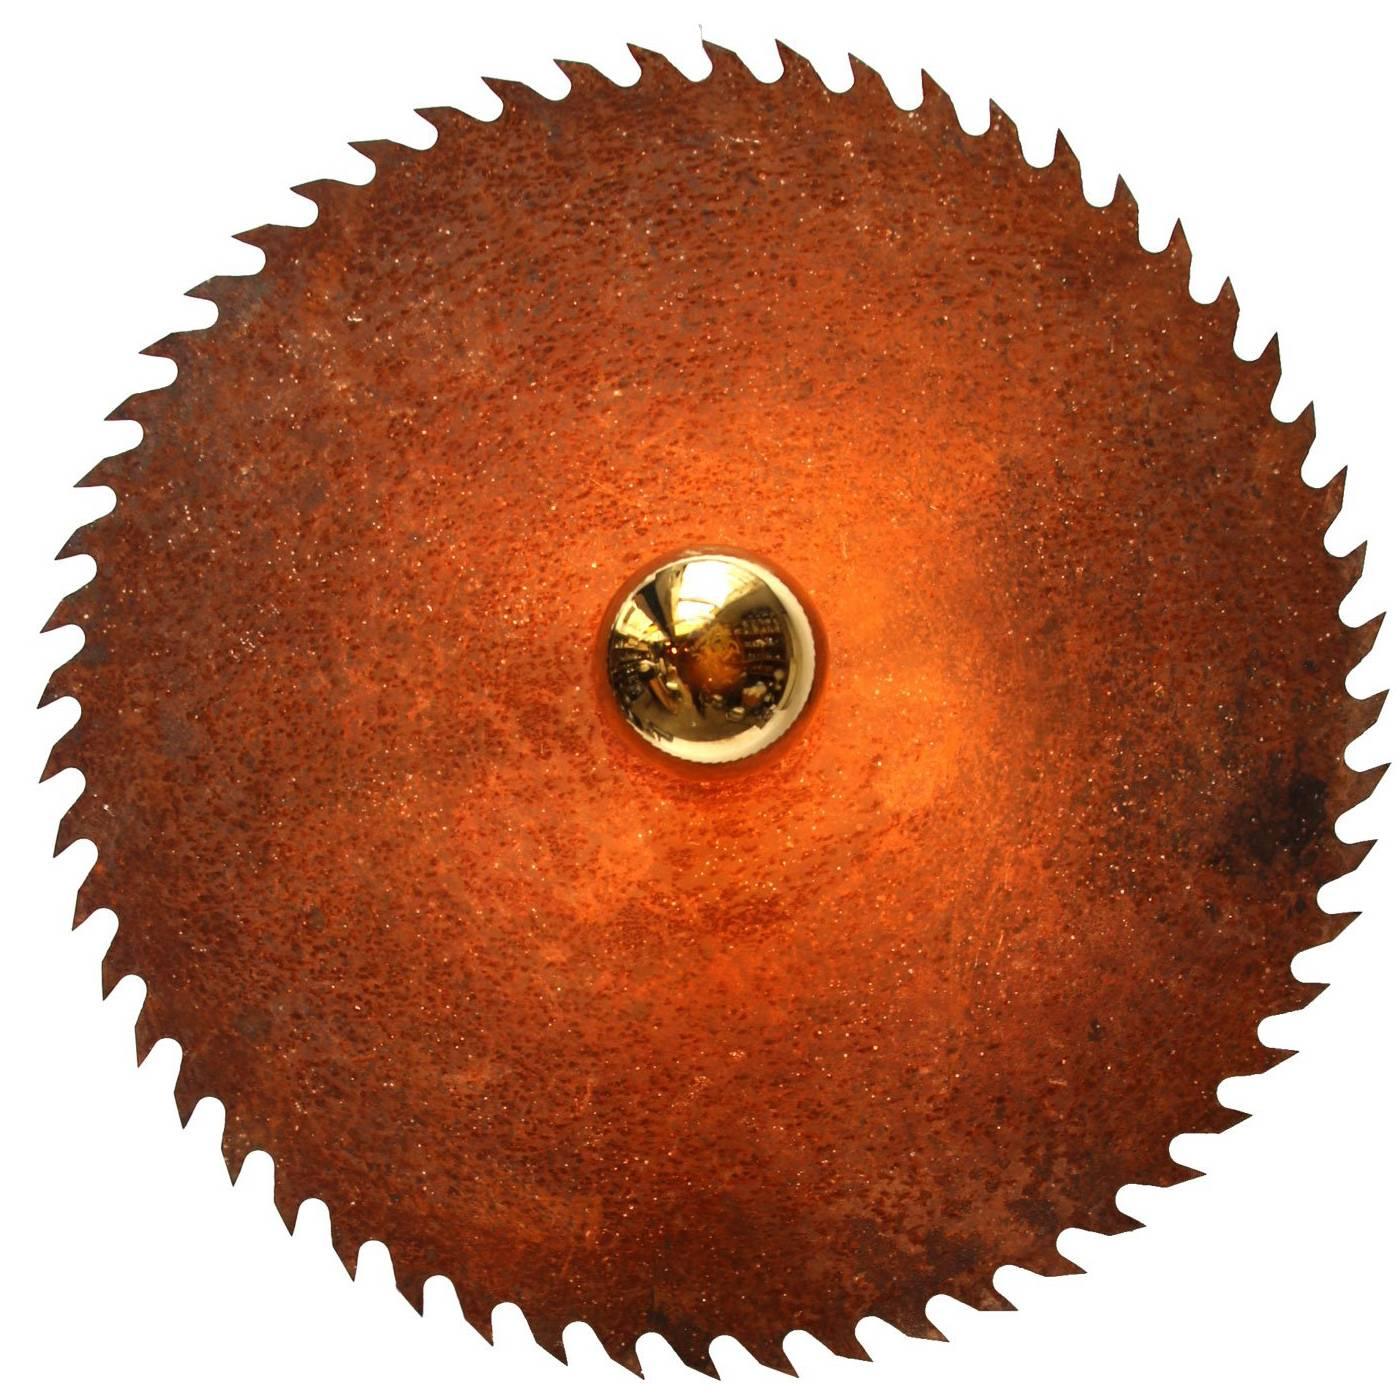 Large vintage French saw blade light.

Priced per individual item. All lamps have been made suitable by international standards for incandescent light bulbs, energy-efficient and LED bulbs. E26/E27 bulb holders and new wiring are CE certified or